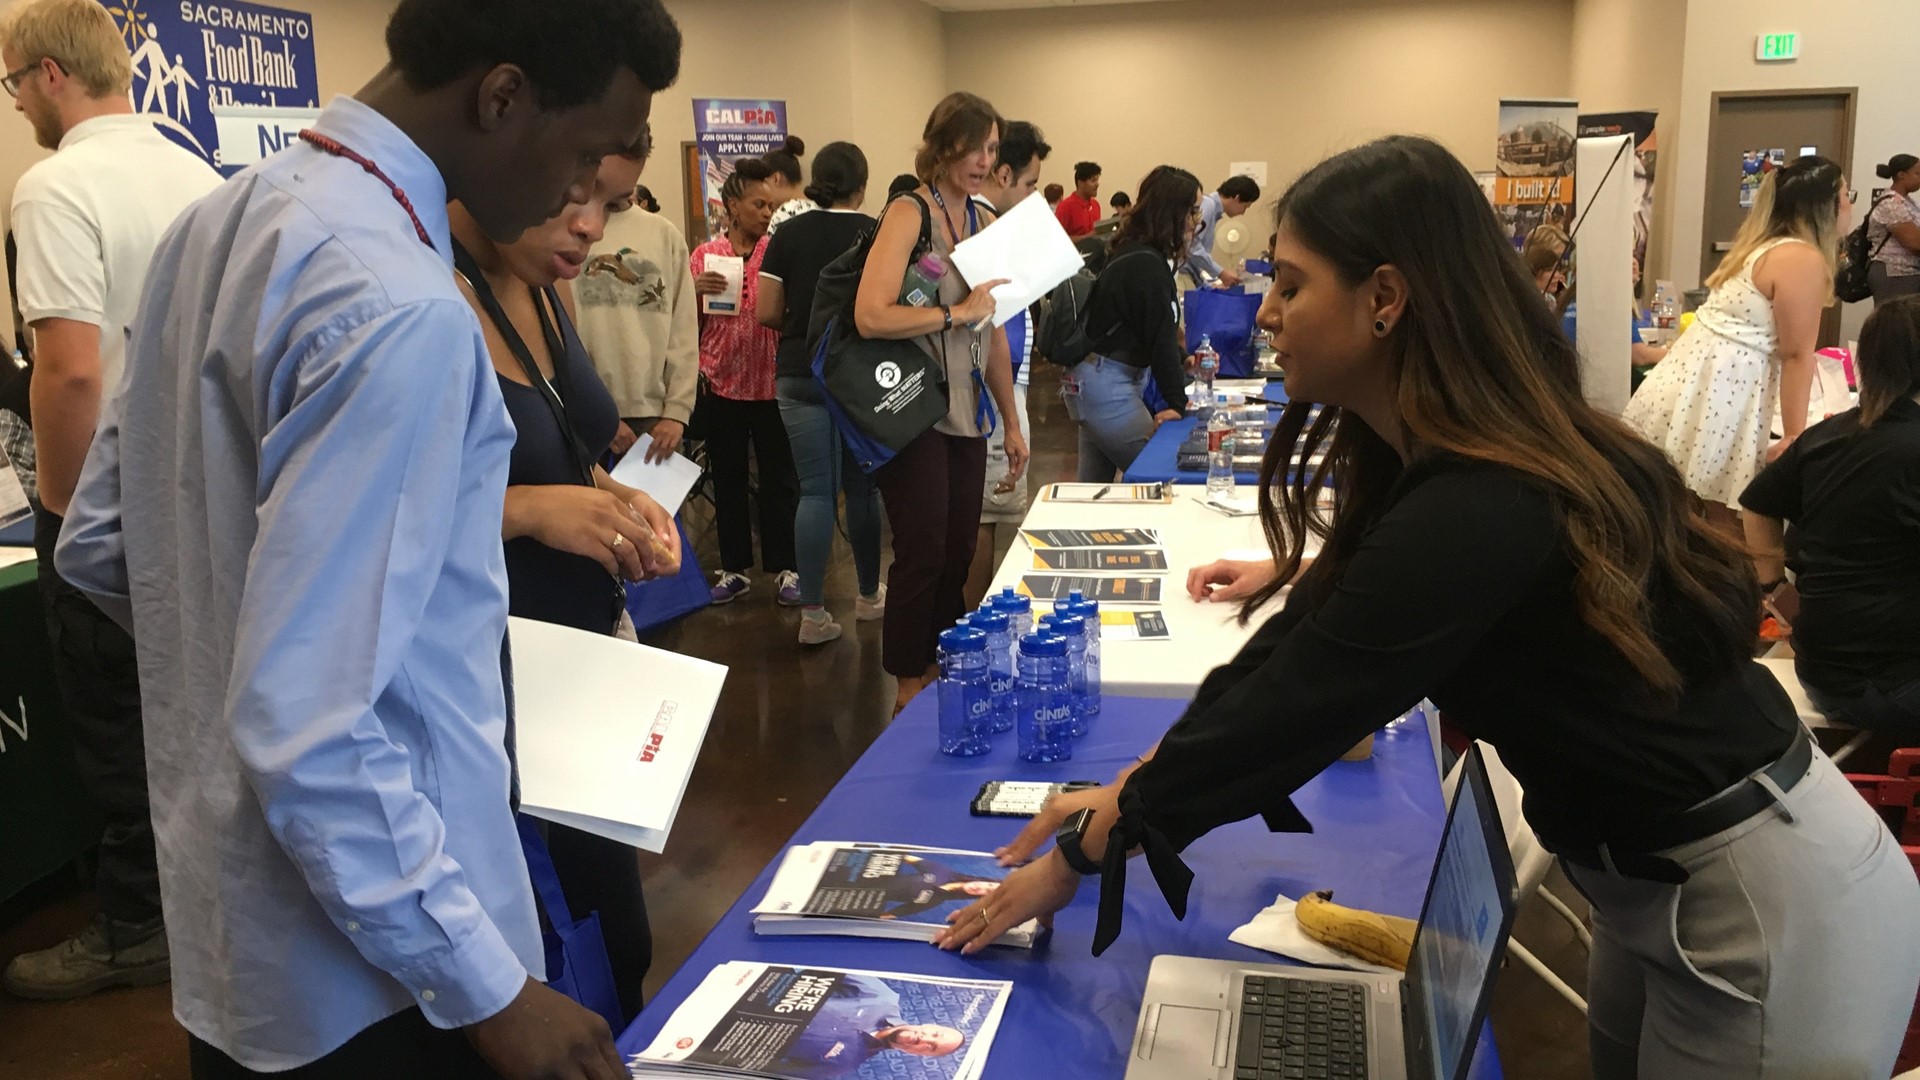 Students from all over the Sacramento area flocked to the a Youth Job Fair hosted by the California Employment Development Department. Dozens of employers showcased what they have to offer to the workforce of the future.